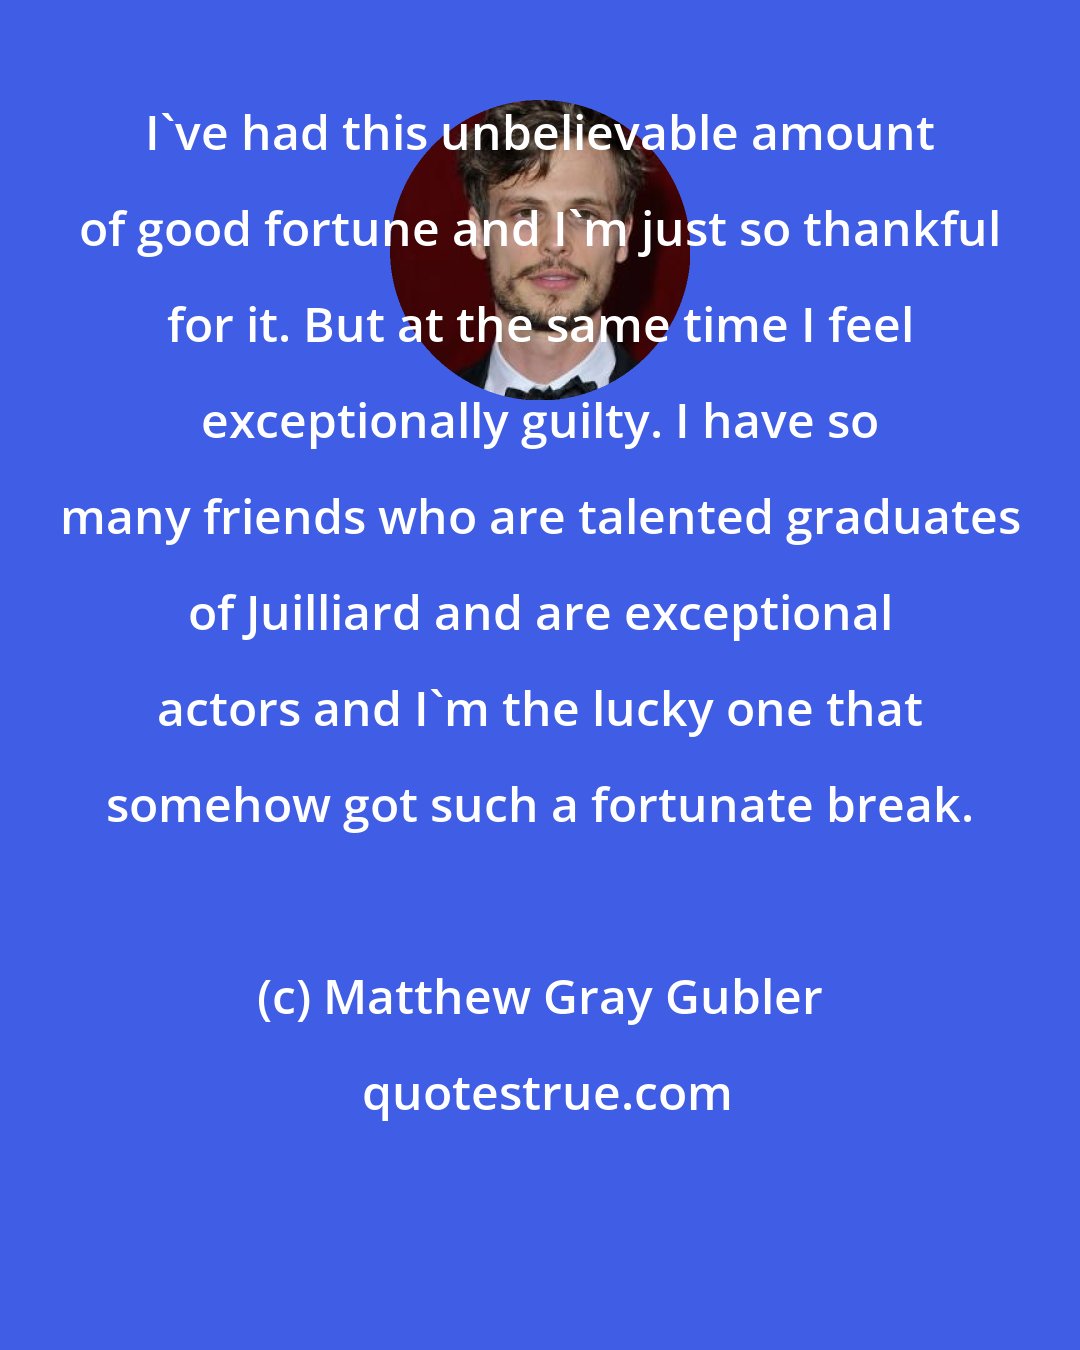 Matthew Gray Gubler: I've had this unbelievable amount of good fortune and I'm just so thankful for it. But at the same time I feel exceptionally guilty. I have so many friends who are talented graduates of Juilliard and are exceptional actors and I'm the lucky one that somehow got such a fortunate break.